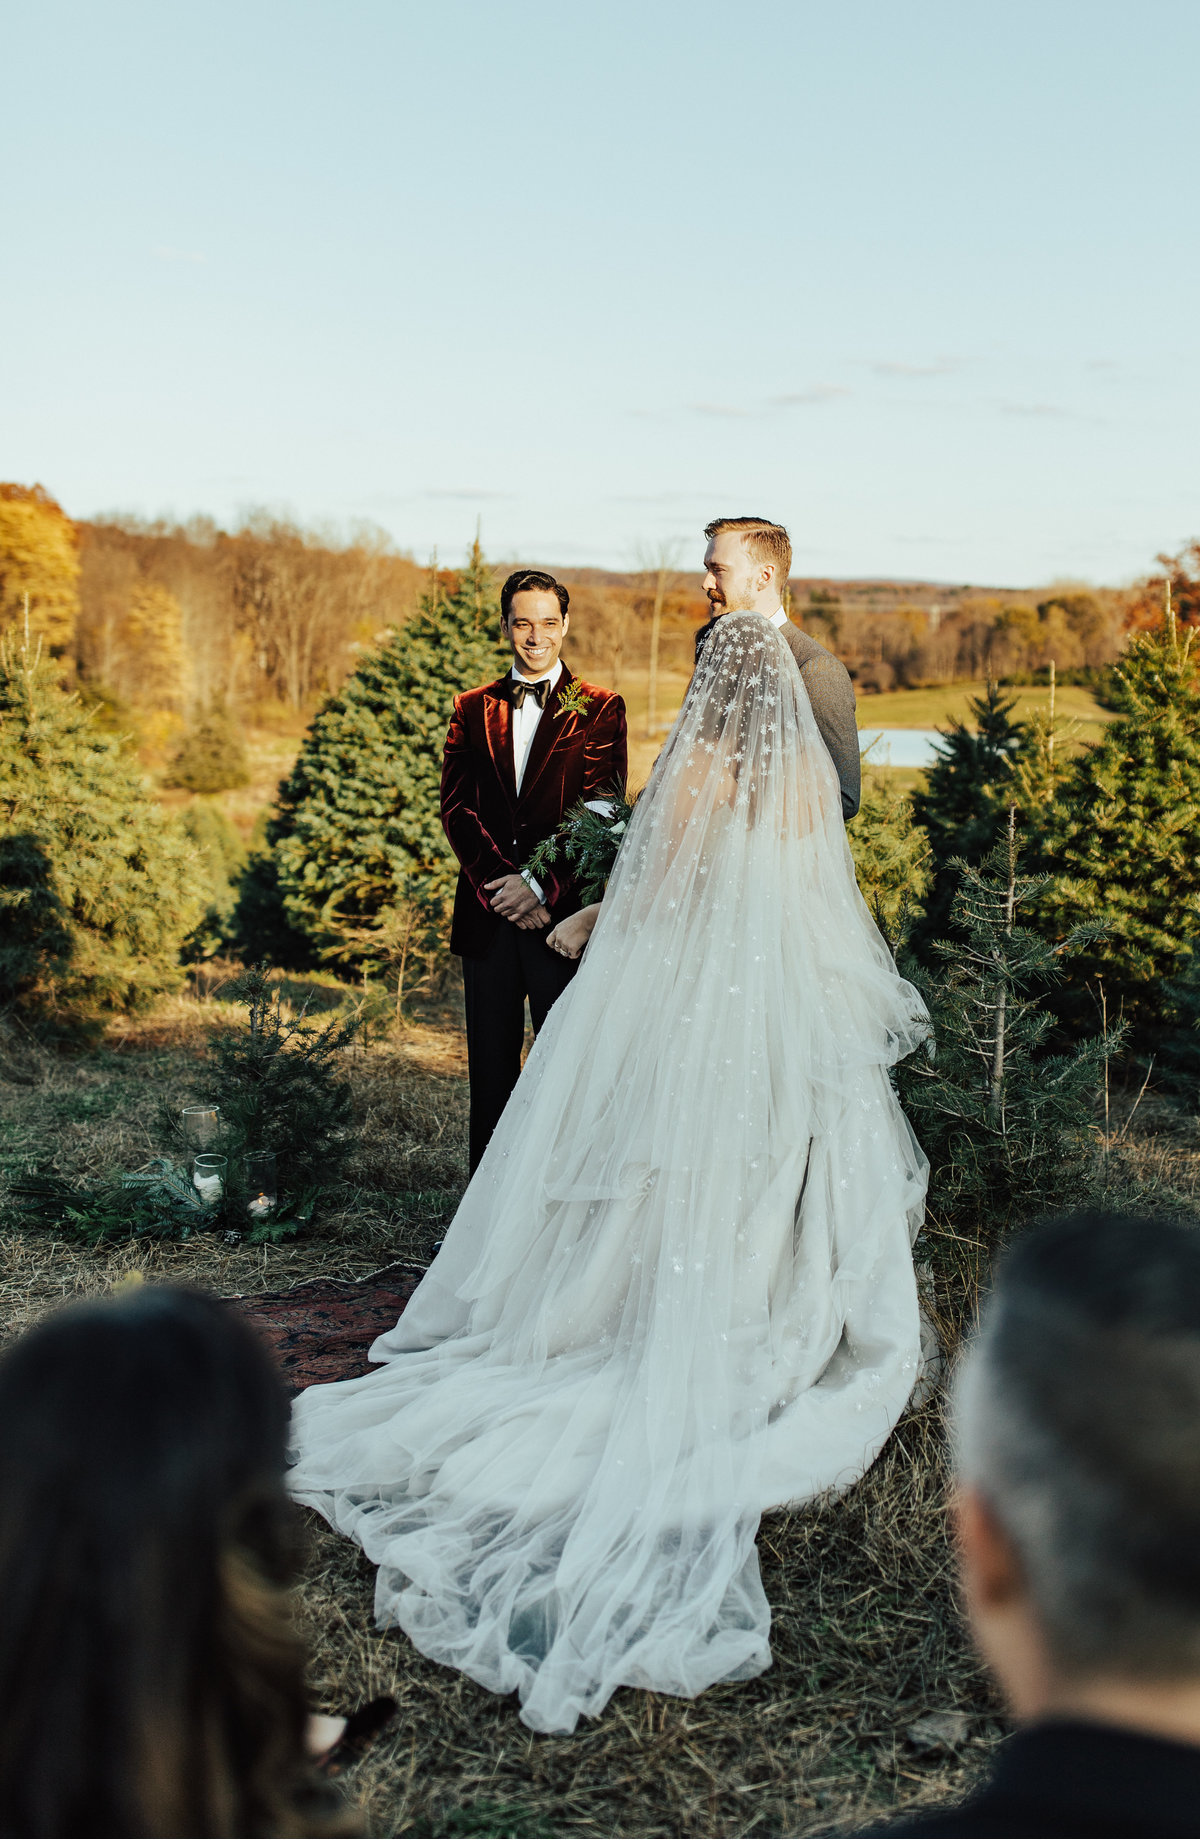 Christy-l-Johnston-Photography-Monica-Relyea-Events-Noelle-Downing-Instagram-Noelle_s-Favorite-Day-Wedding-Battenfelds-Christmas-tree-farm-Red-Hook-New-York-Hudson-Valley-upstate-november-2019-AP1A8159